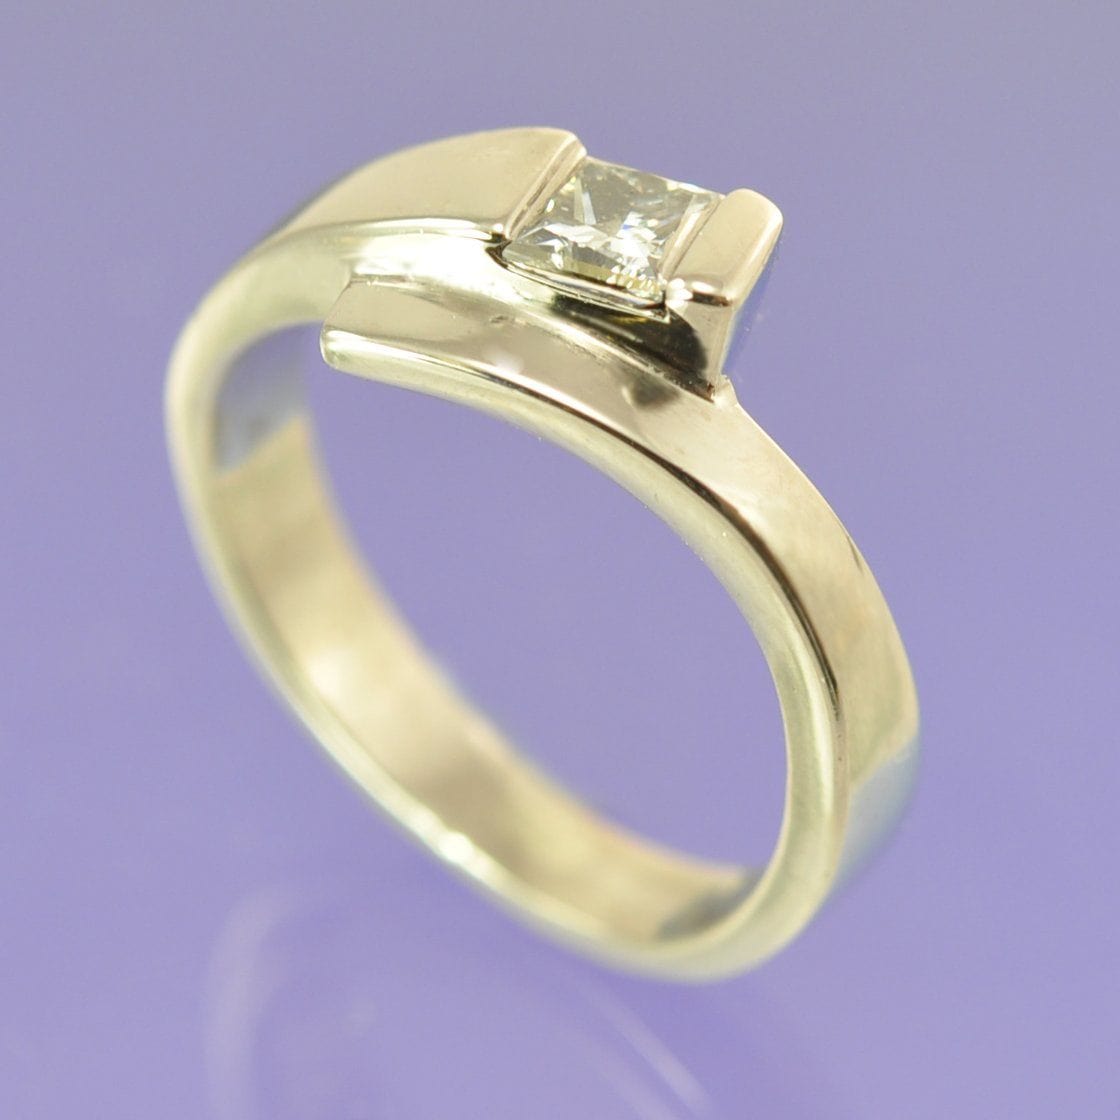 Fly-by Diamond Ring Ring by Chris Parry Jewellery